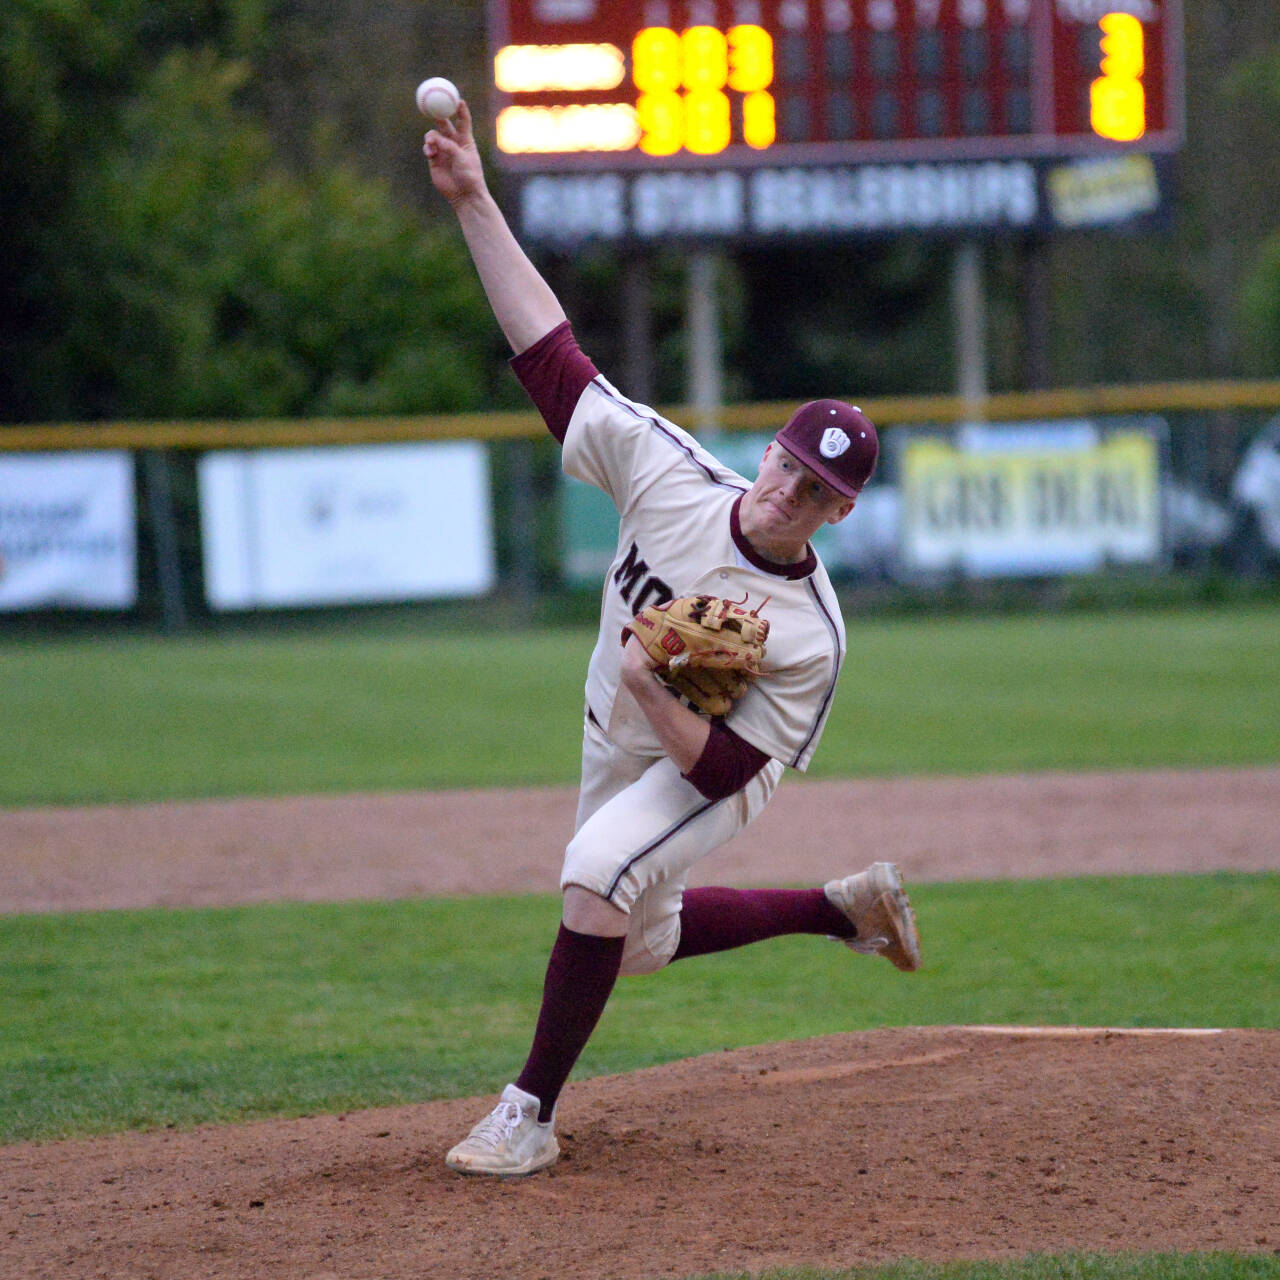 RYAN SPARKS | THE DAILY WORLD 
Montesano starting pitcher Cam Taylor allowed three runs on three hits in five innings pitched to lead the Bulldogs to an 11-4 win over Tenino on Wednesday in Montesano. The victory clinched the 1A Evergreen League title for the Bulldogs.